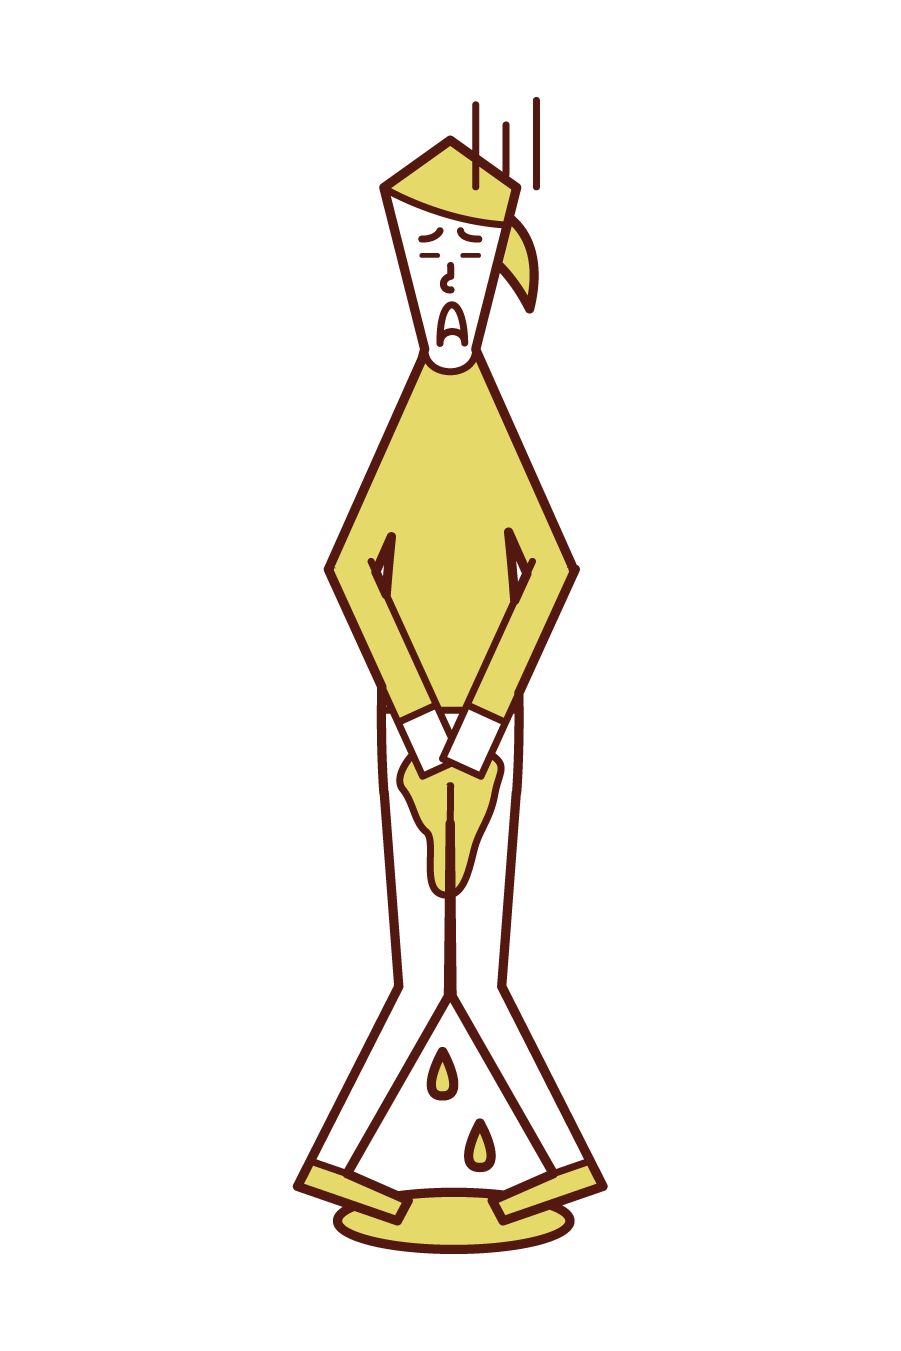 Illustration of a person (woman) who leaked urinary incontinence